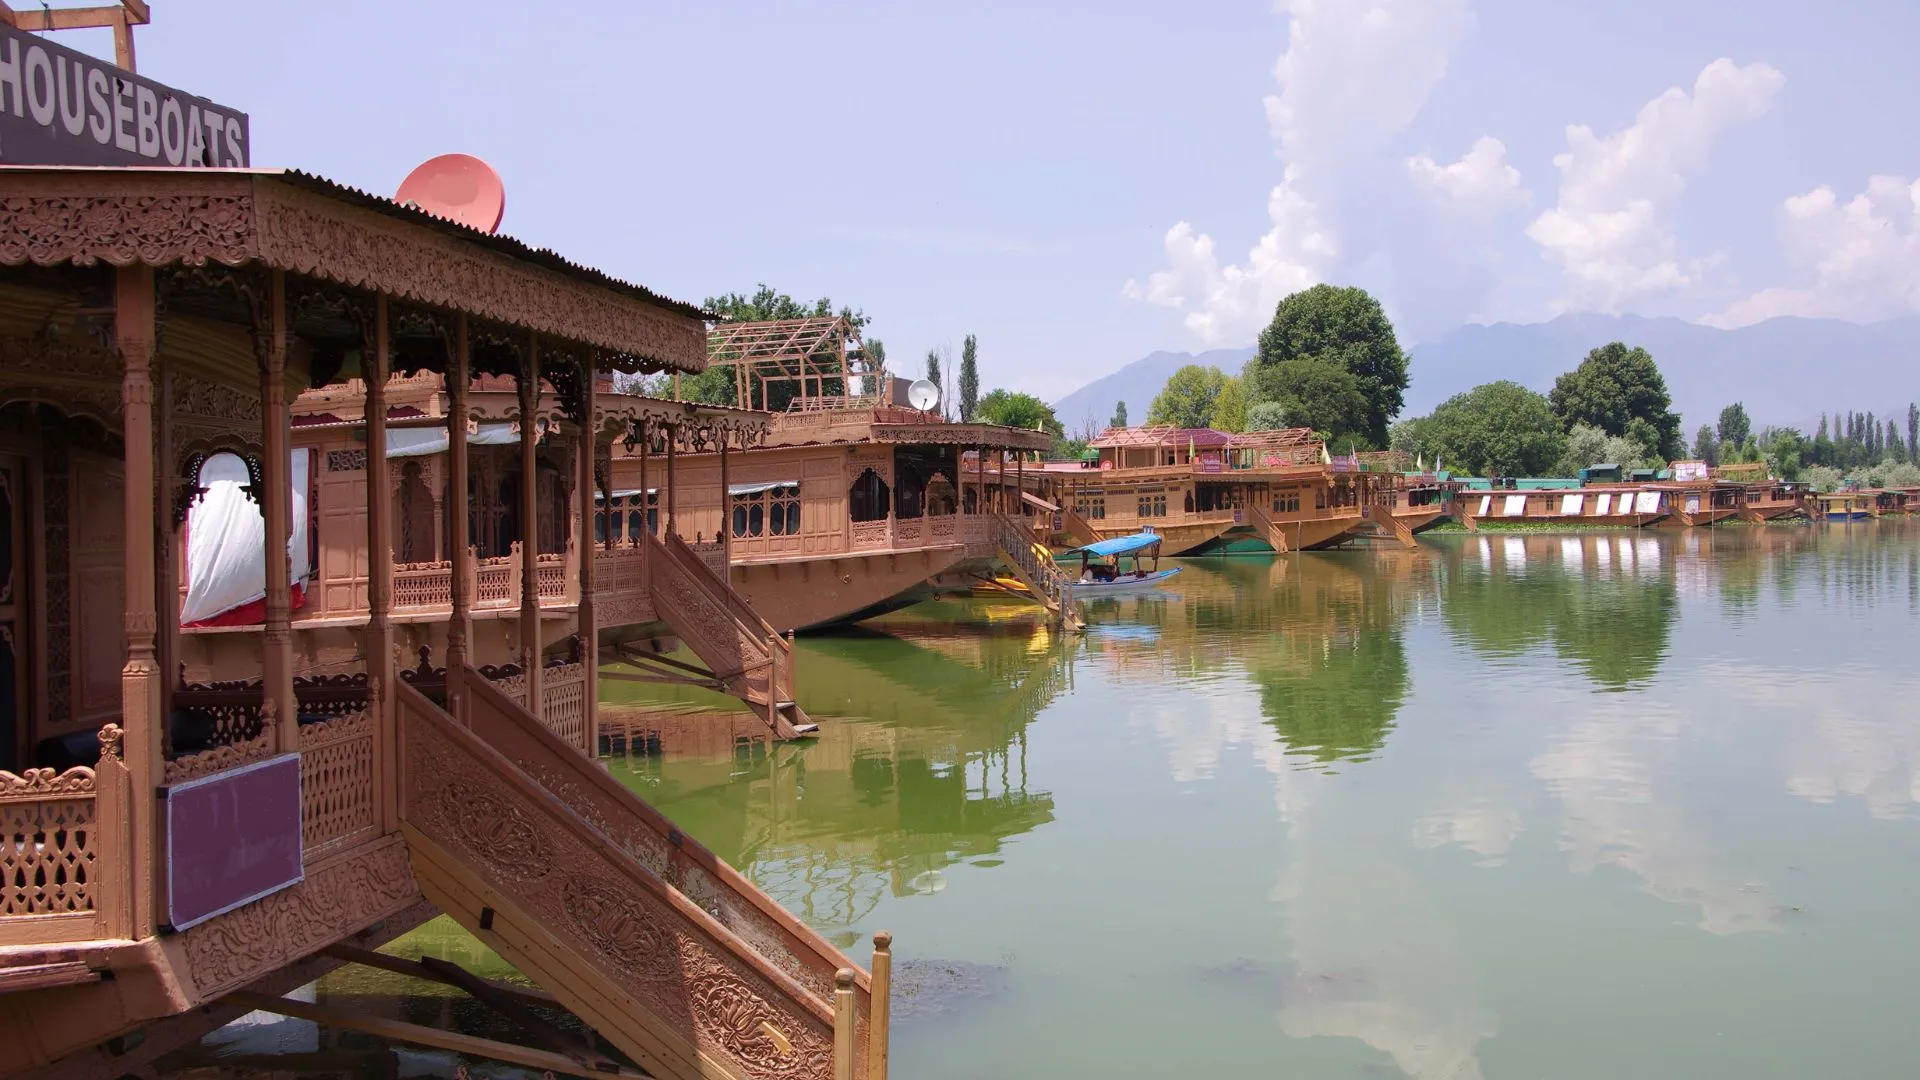 Several Thai house boats on a body of water